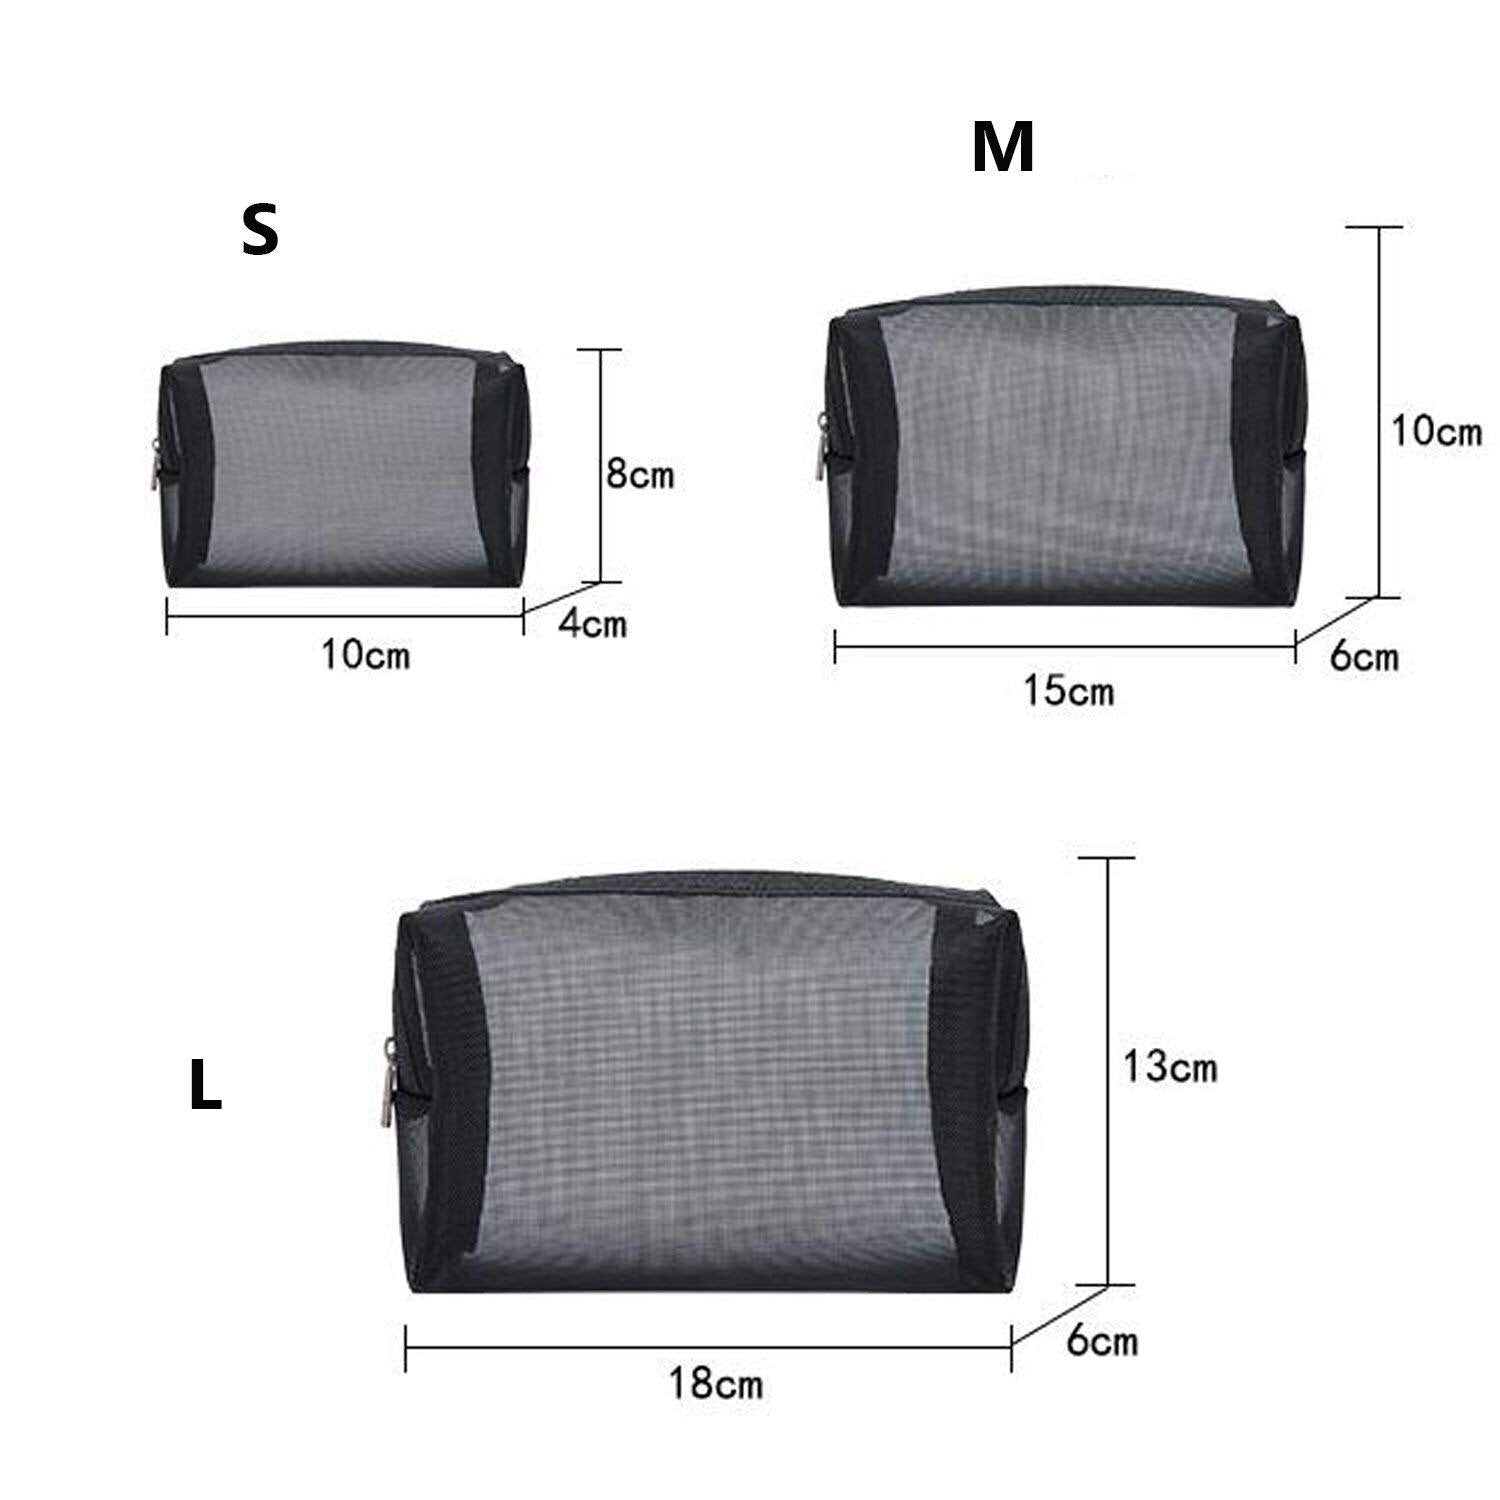 Black Mesh Makeup Bag See Through Zipper Pouch Travel Cosmetic and Toiletries Organizer Bags Pack of 3(S,M,L) - ebowsos